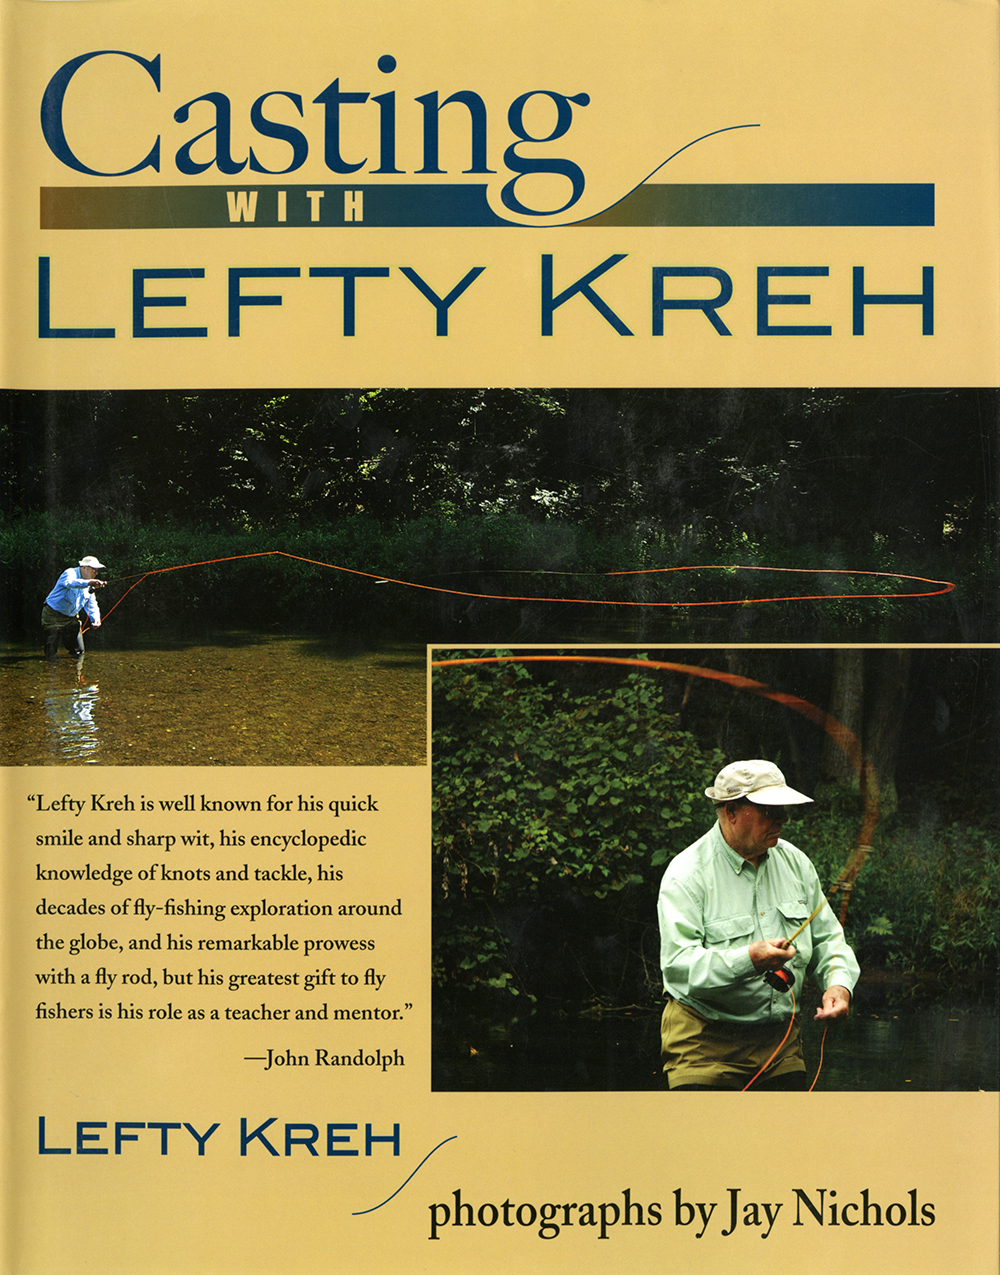 https://www.amff.org/wp-content/uploads/2015/05/Casting-with-Lefty-Kreh.jpg